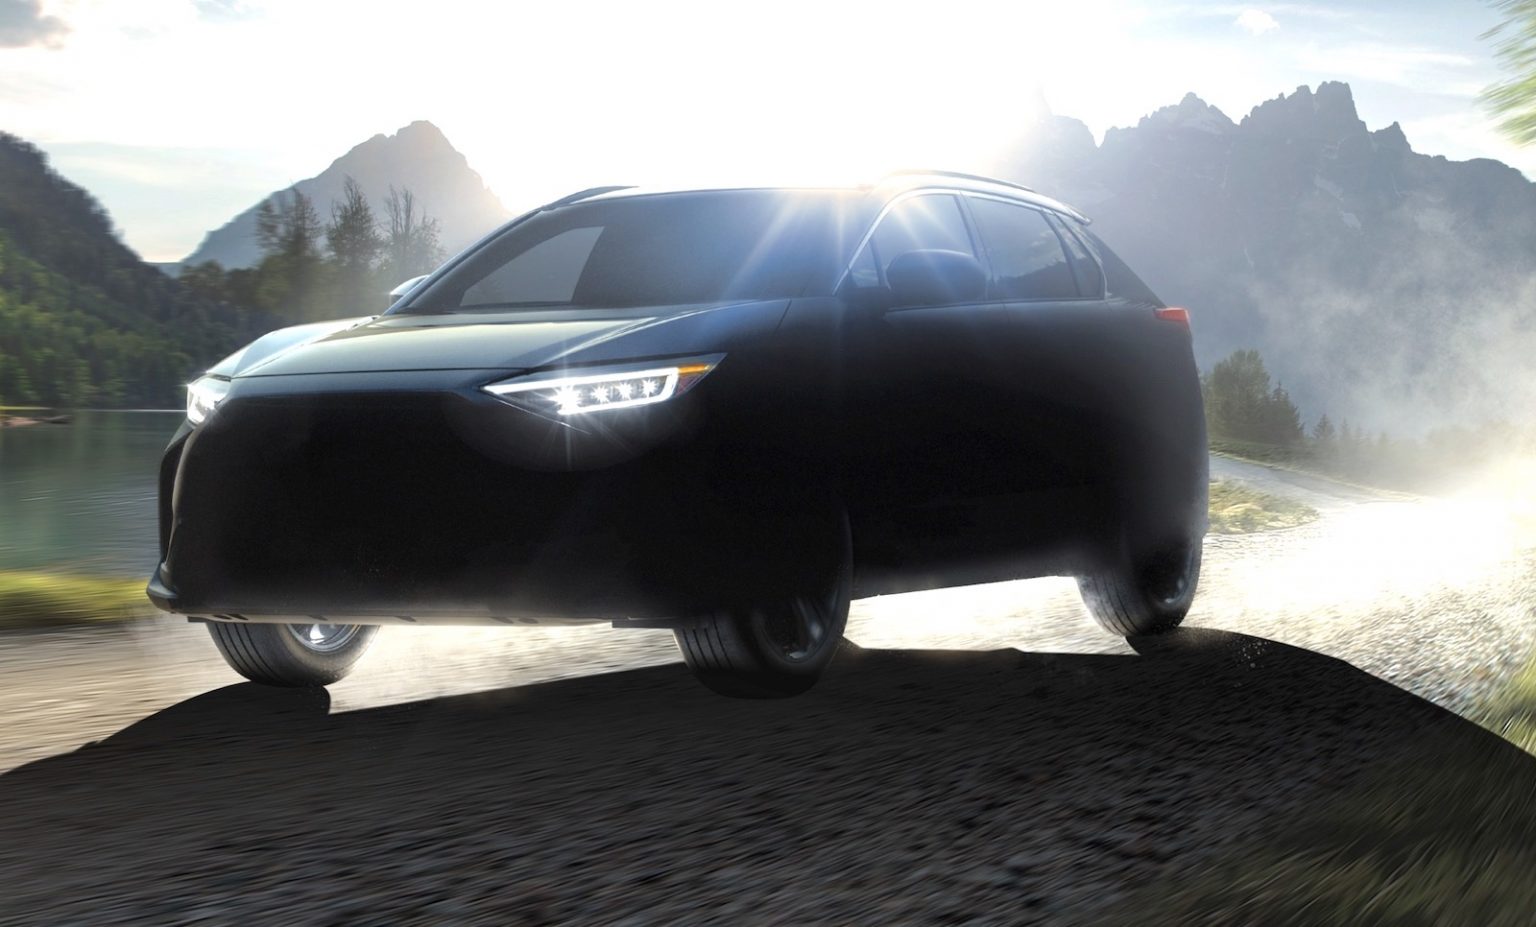 Subaru Solterra confirmed as electric SUV, codeveloped